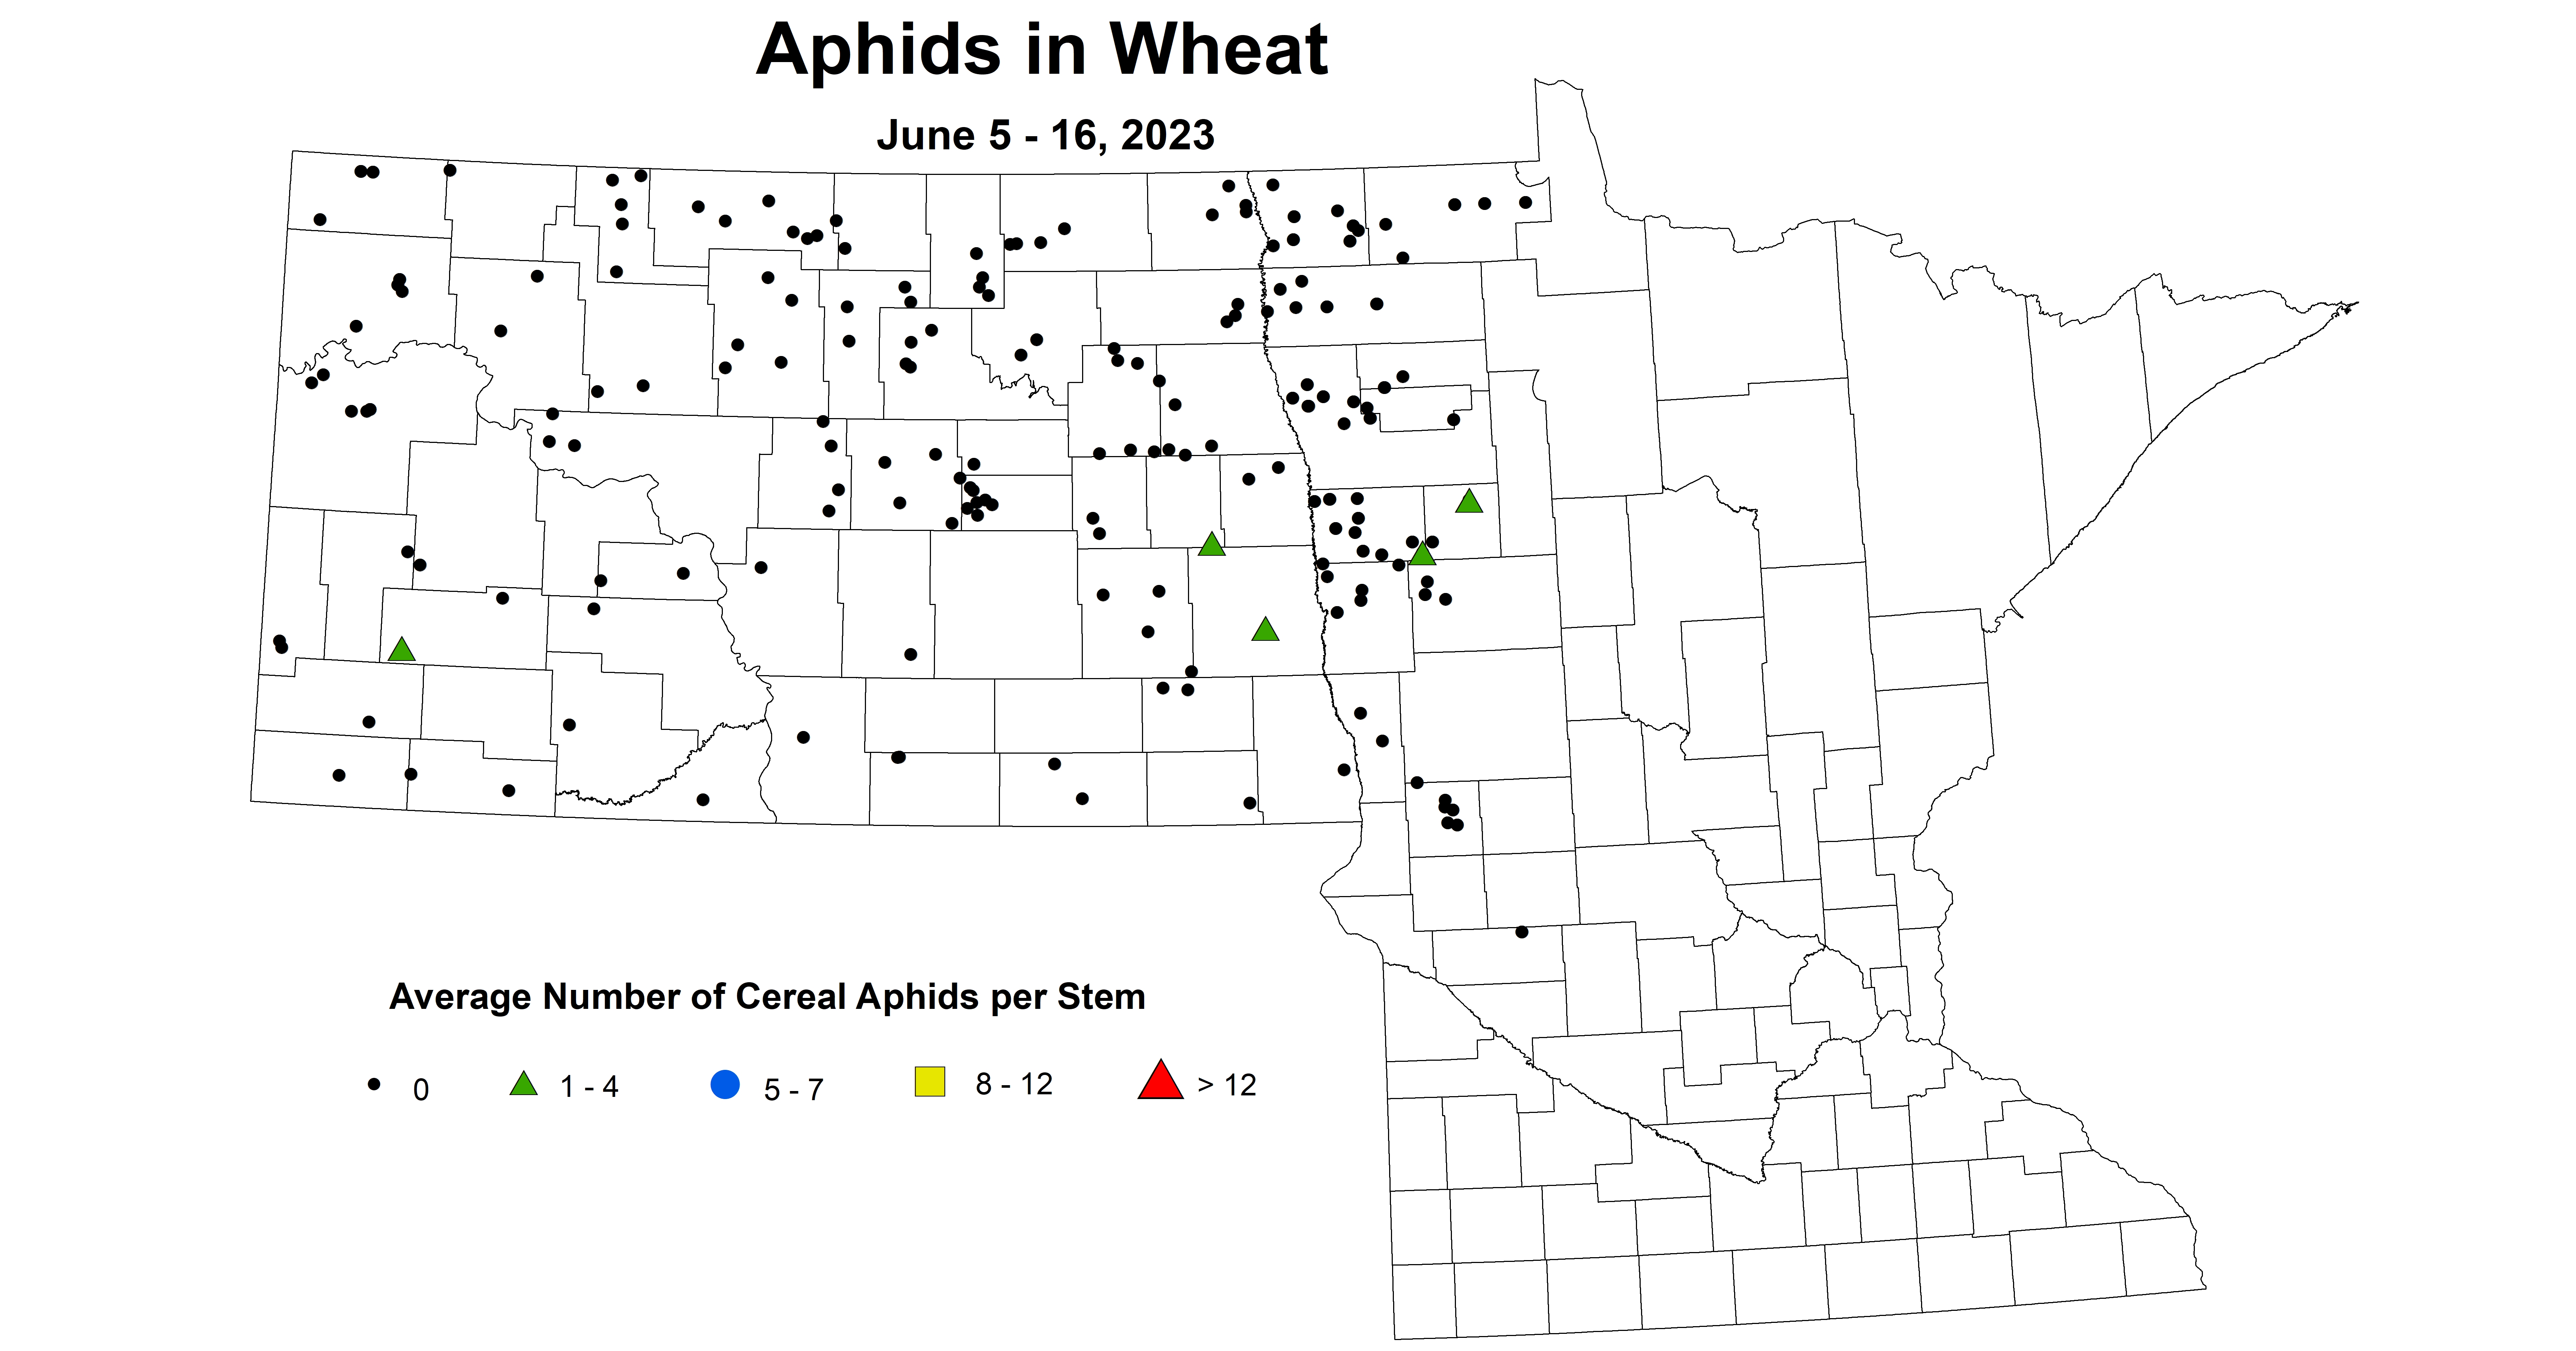 wheat aphids June 5-16 2023